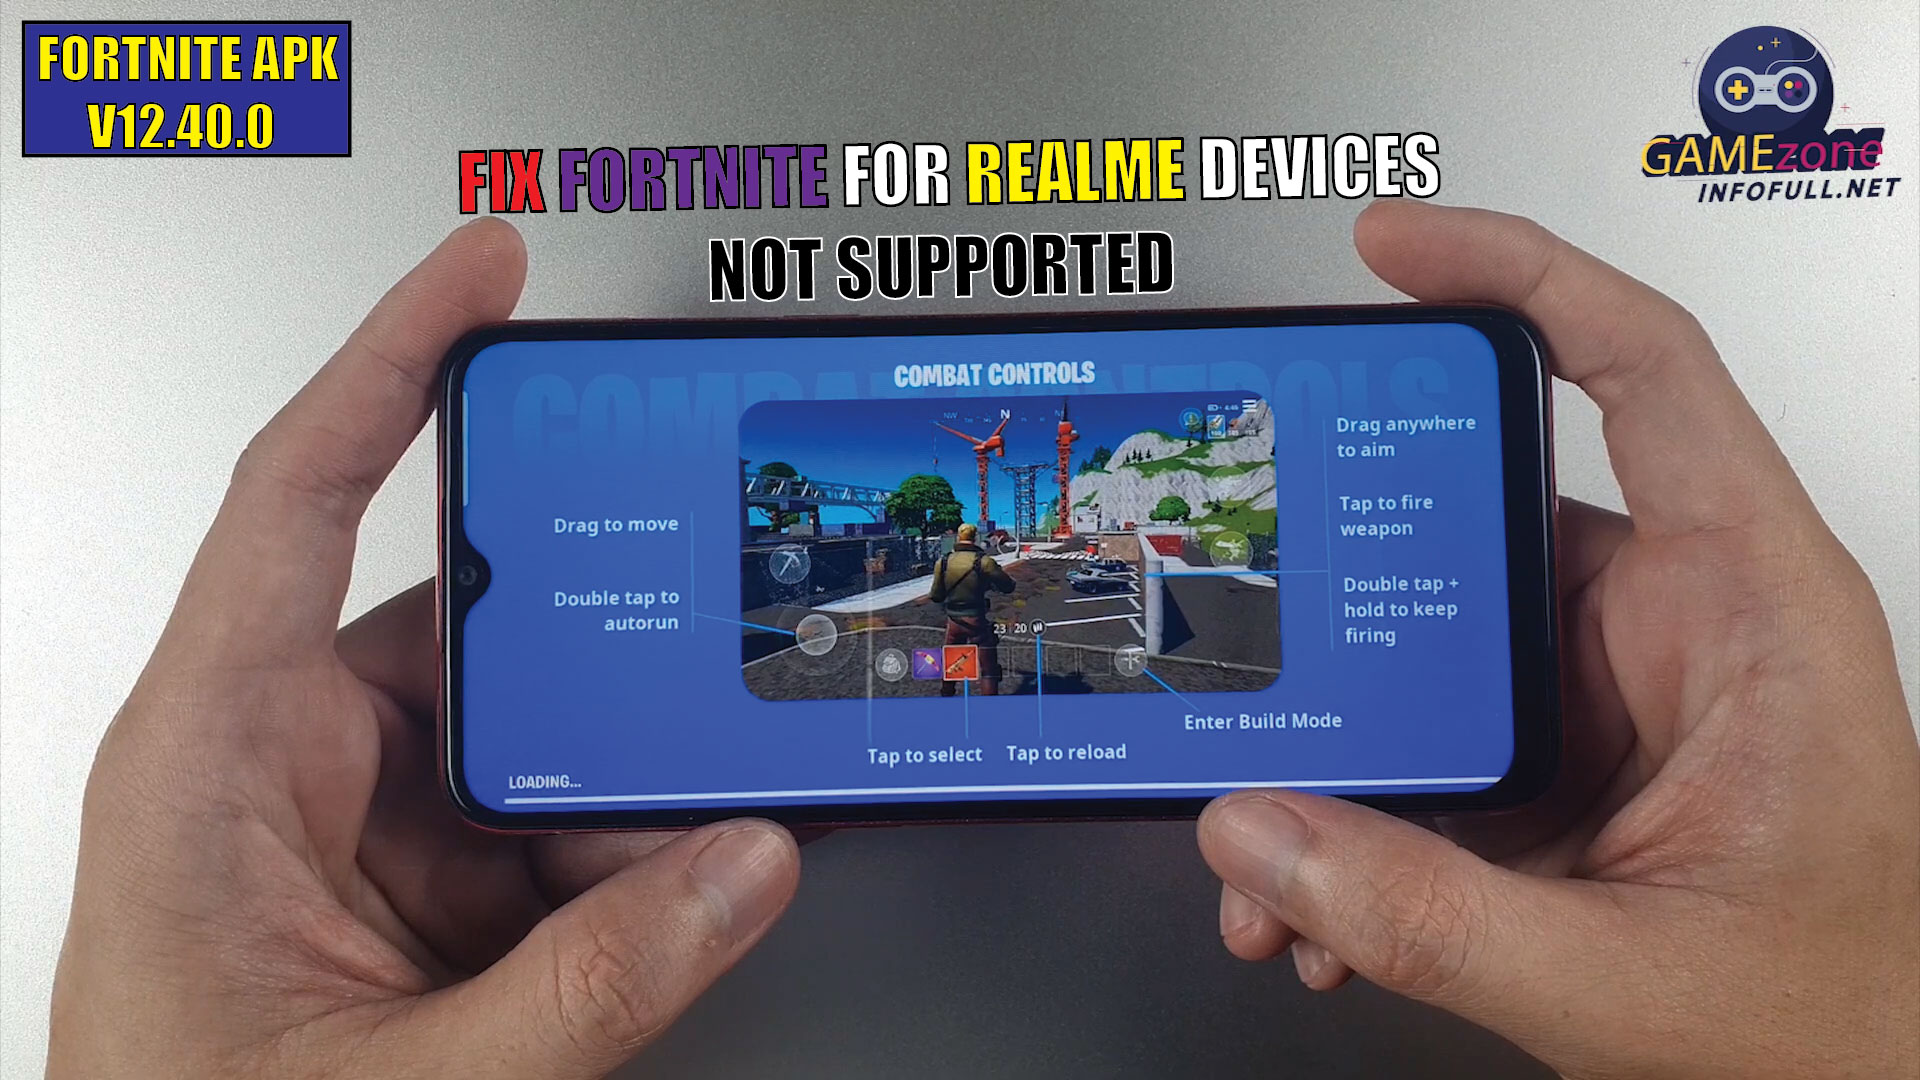 Fortnite Apk V12 40 0 Fix Fortnite Not Working When Choose Play For Realme Devices Not Supported Gsm Full Info